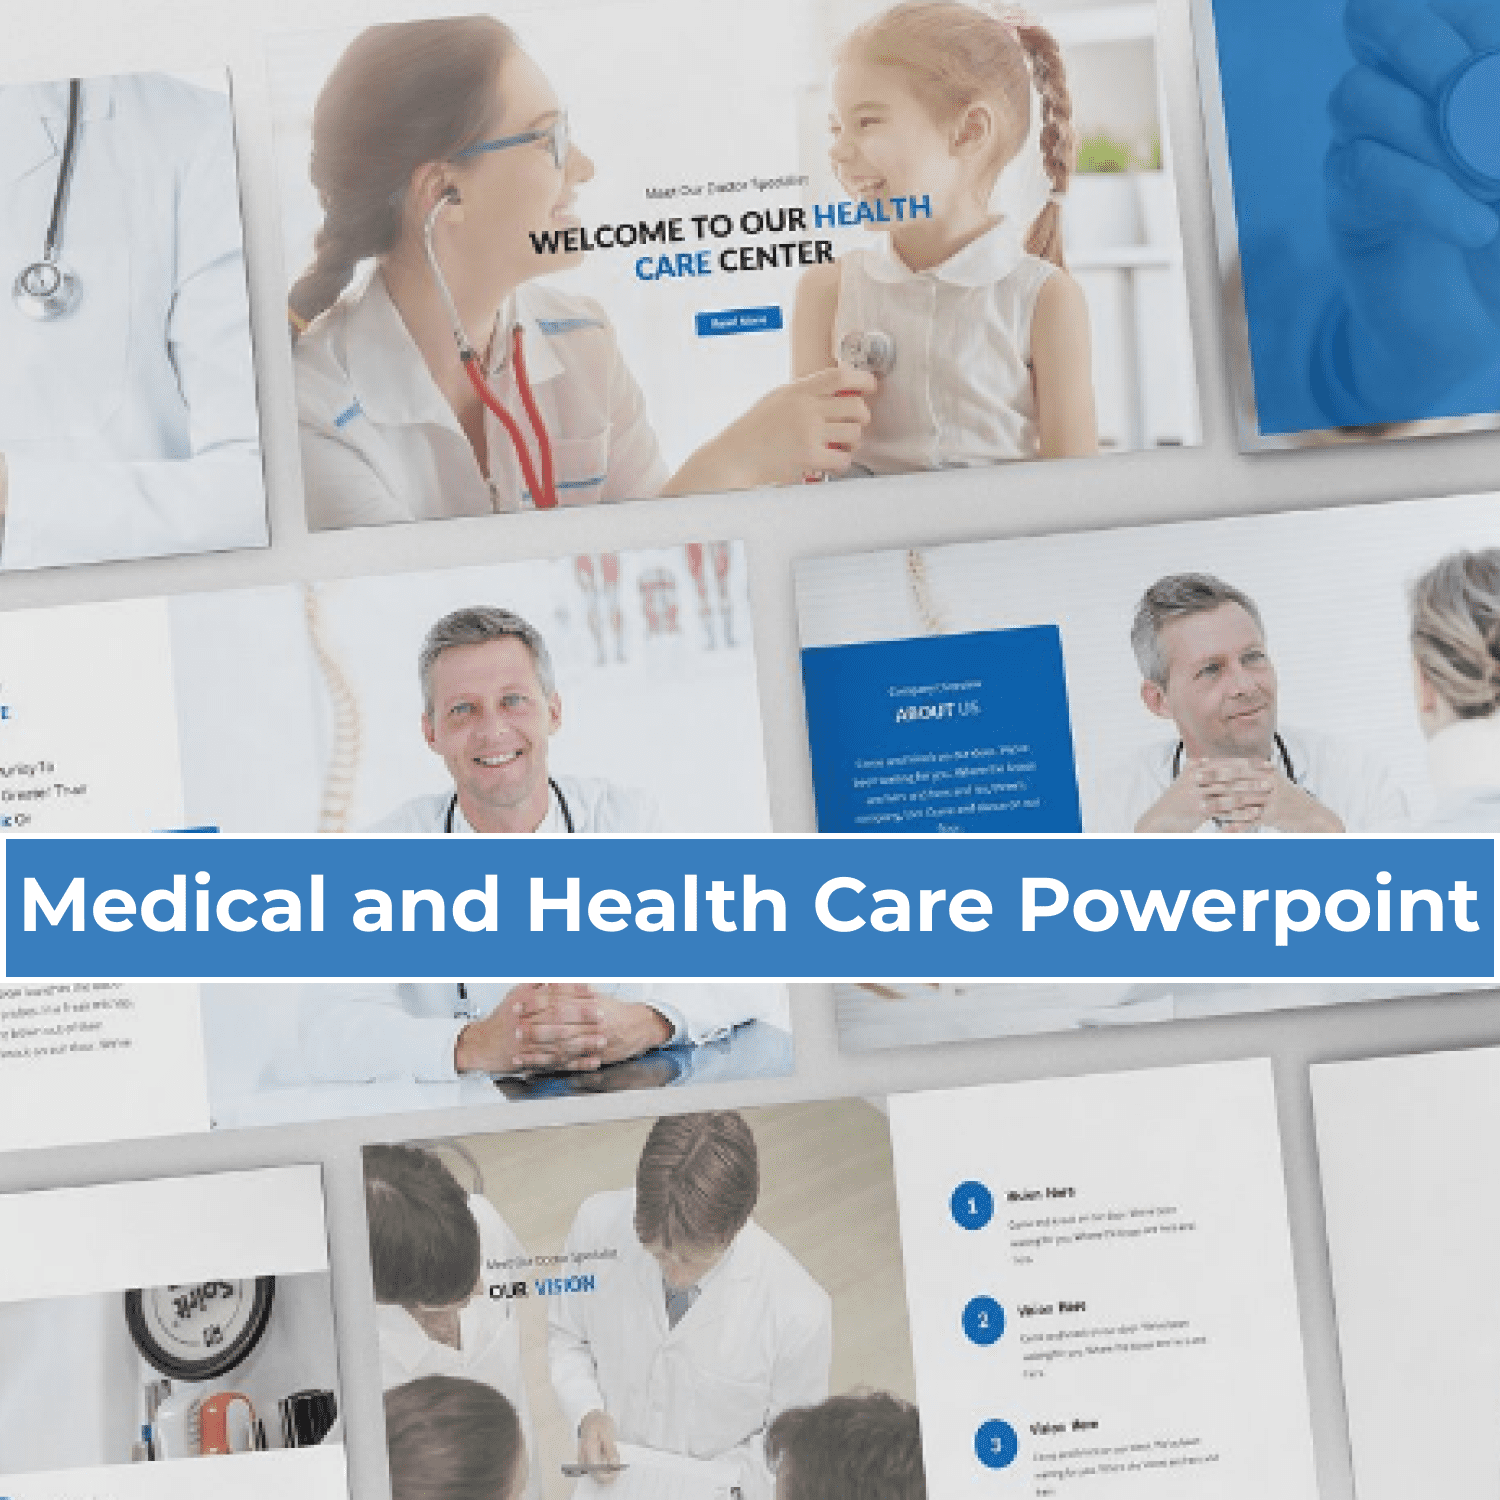 Medical and Health Care Powerpoint cover image.